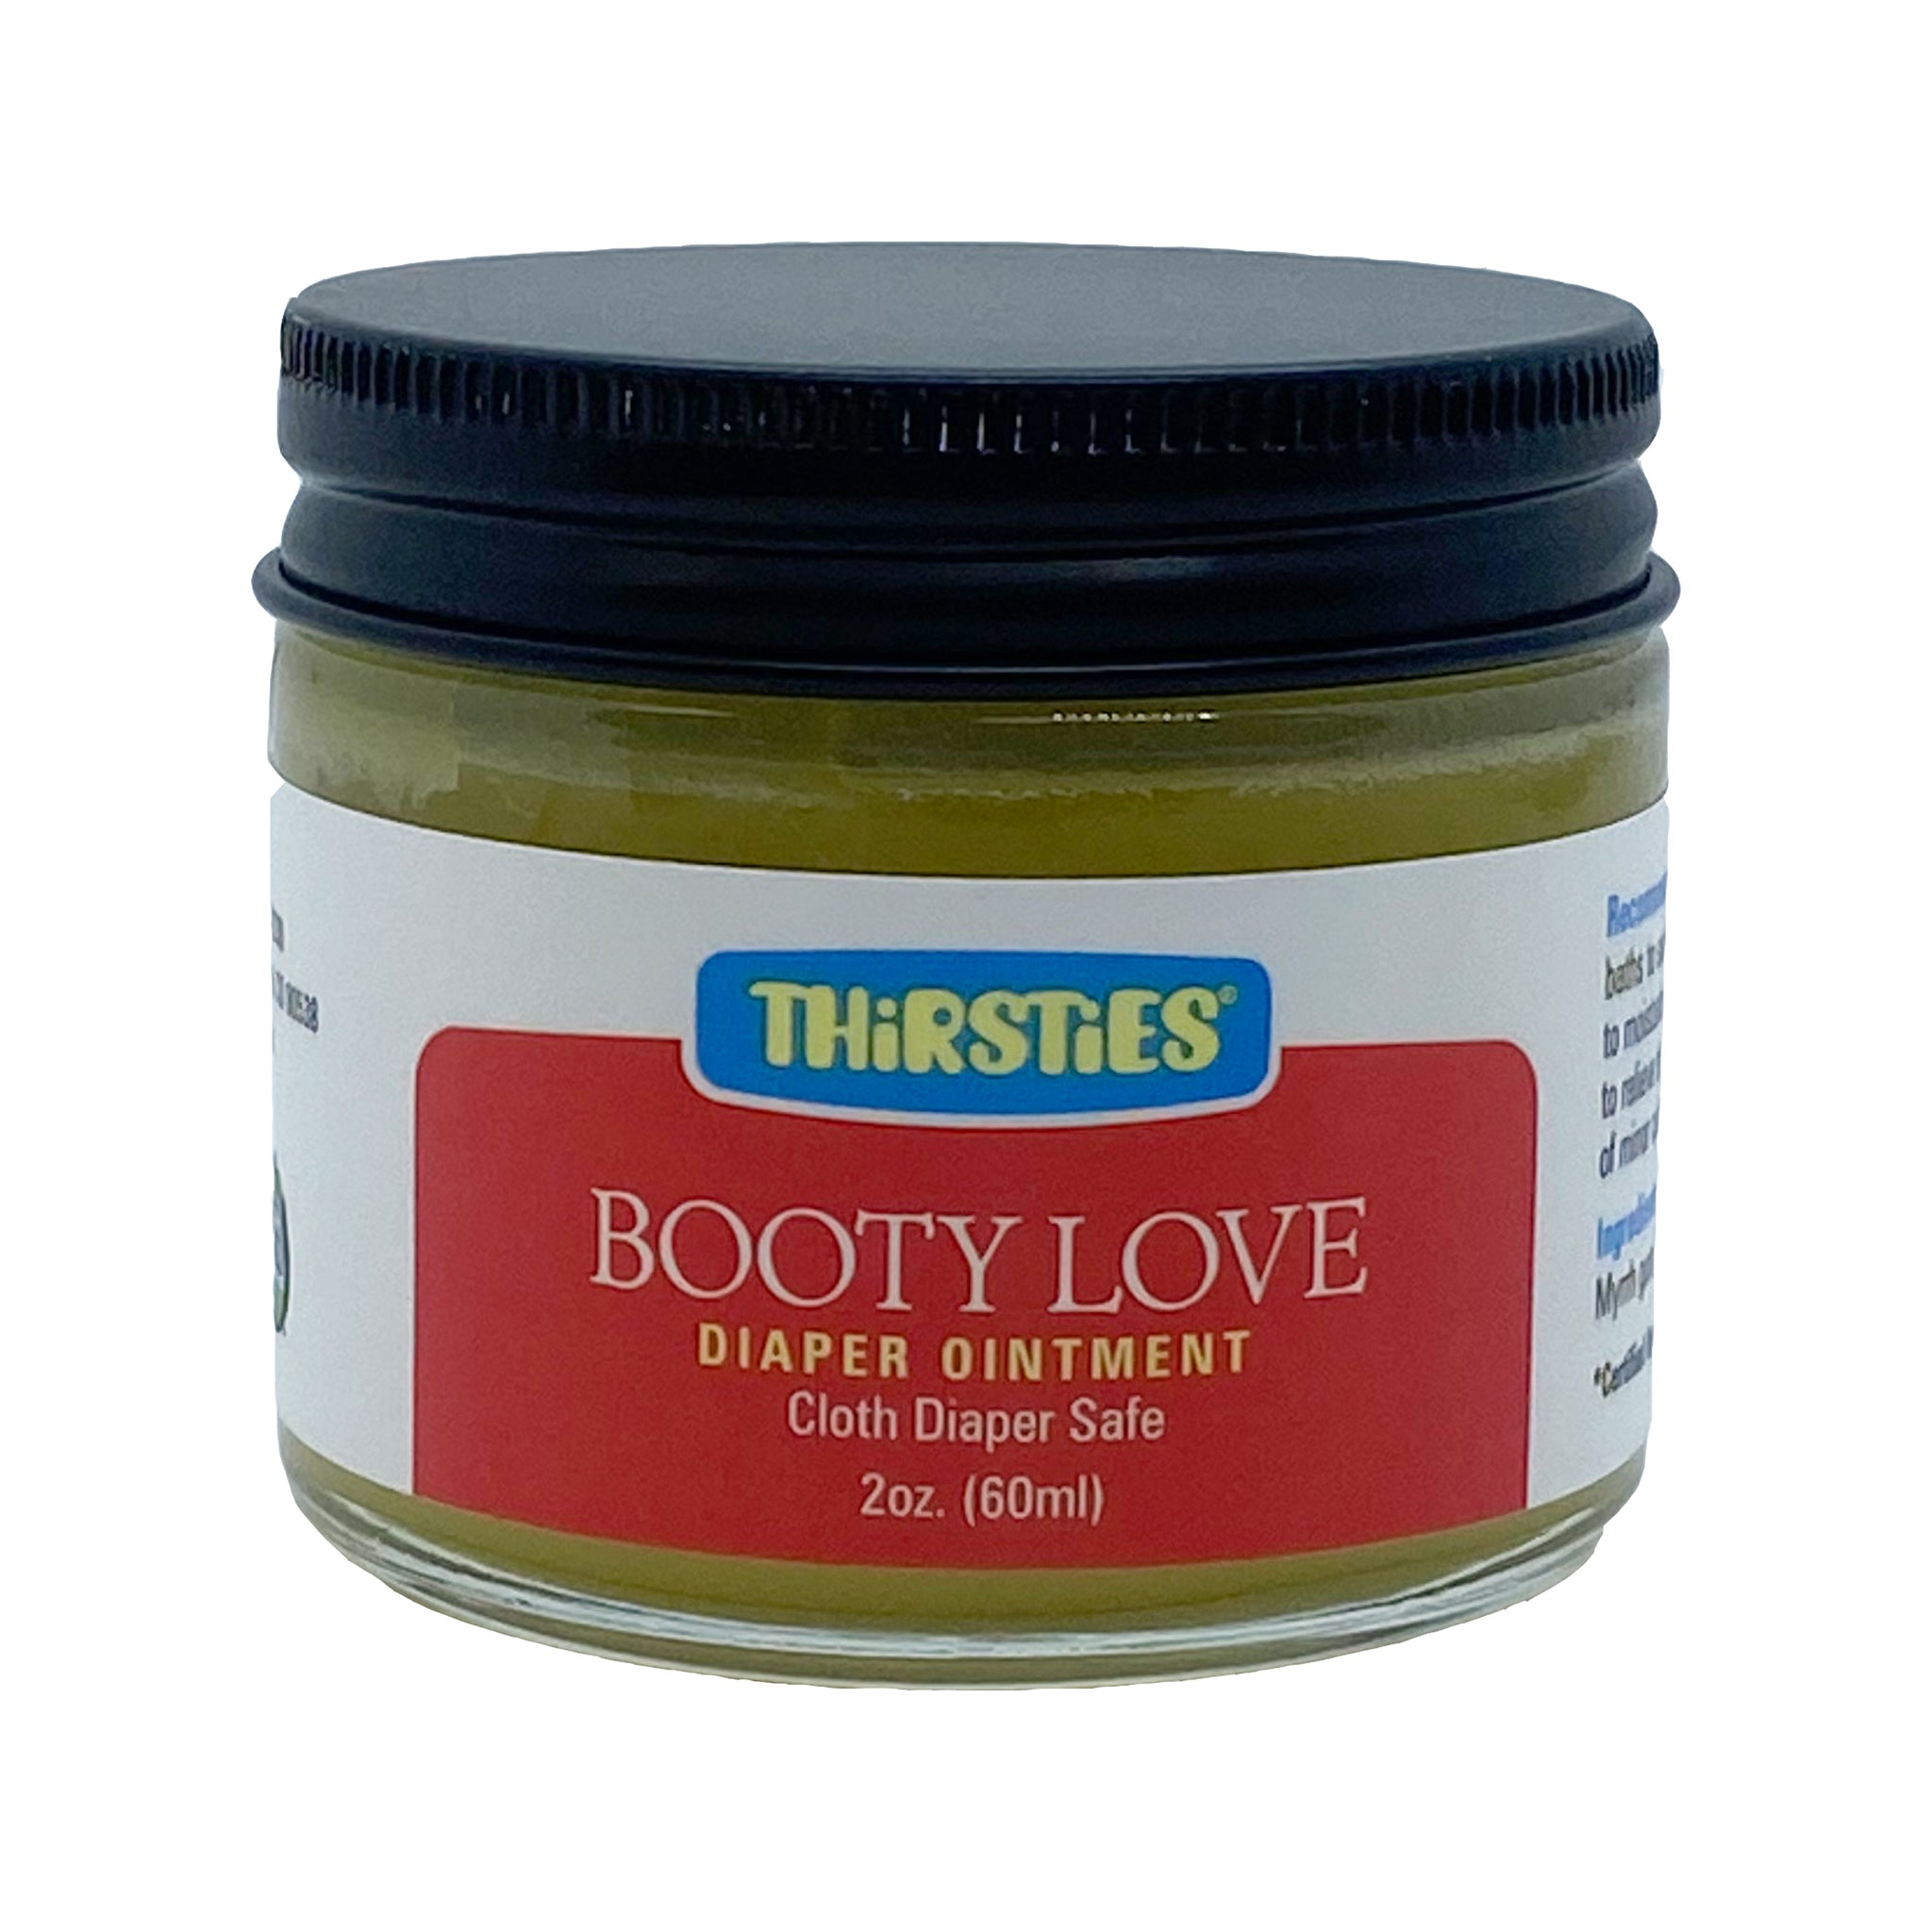 Image of Thirsties Booty Love Diaper Ointment 2oz. jar